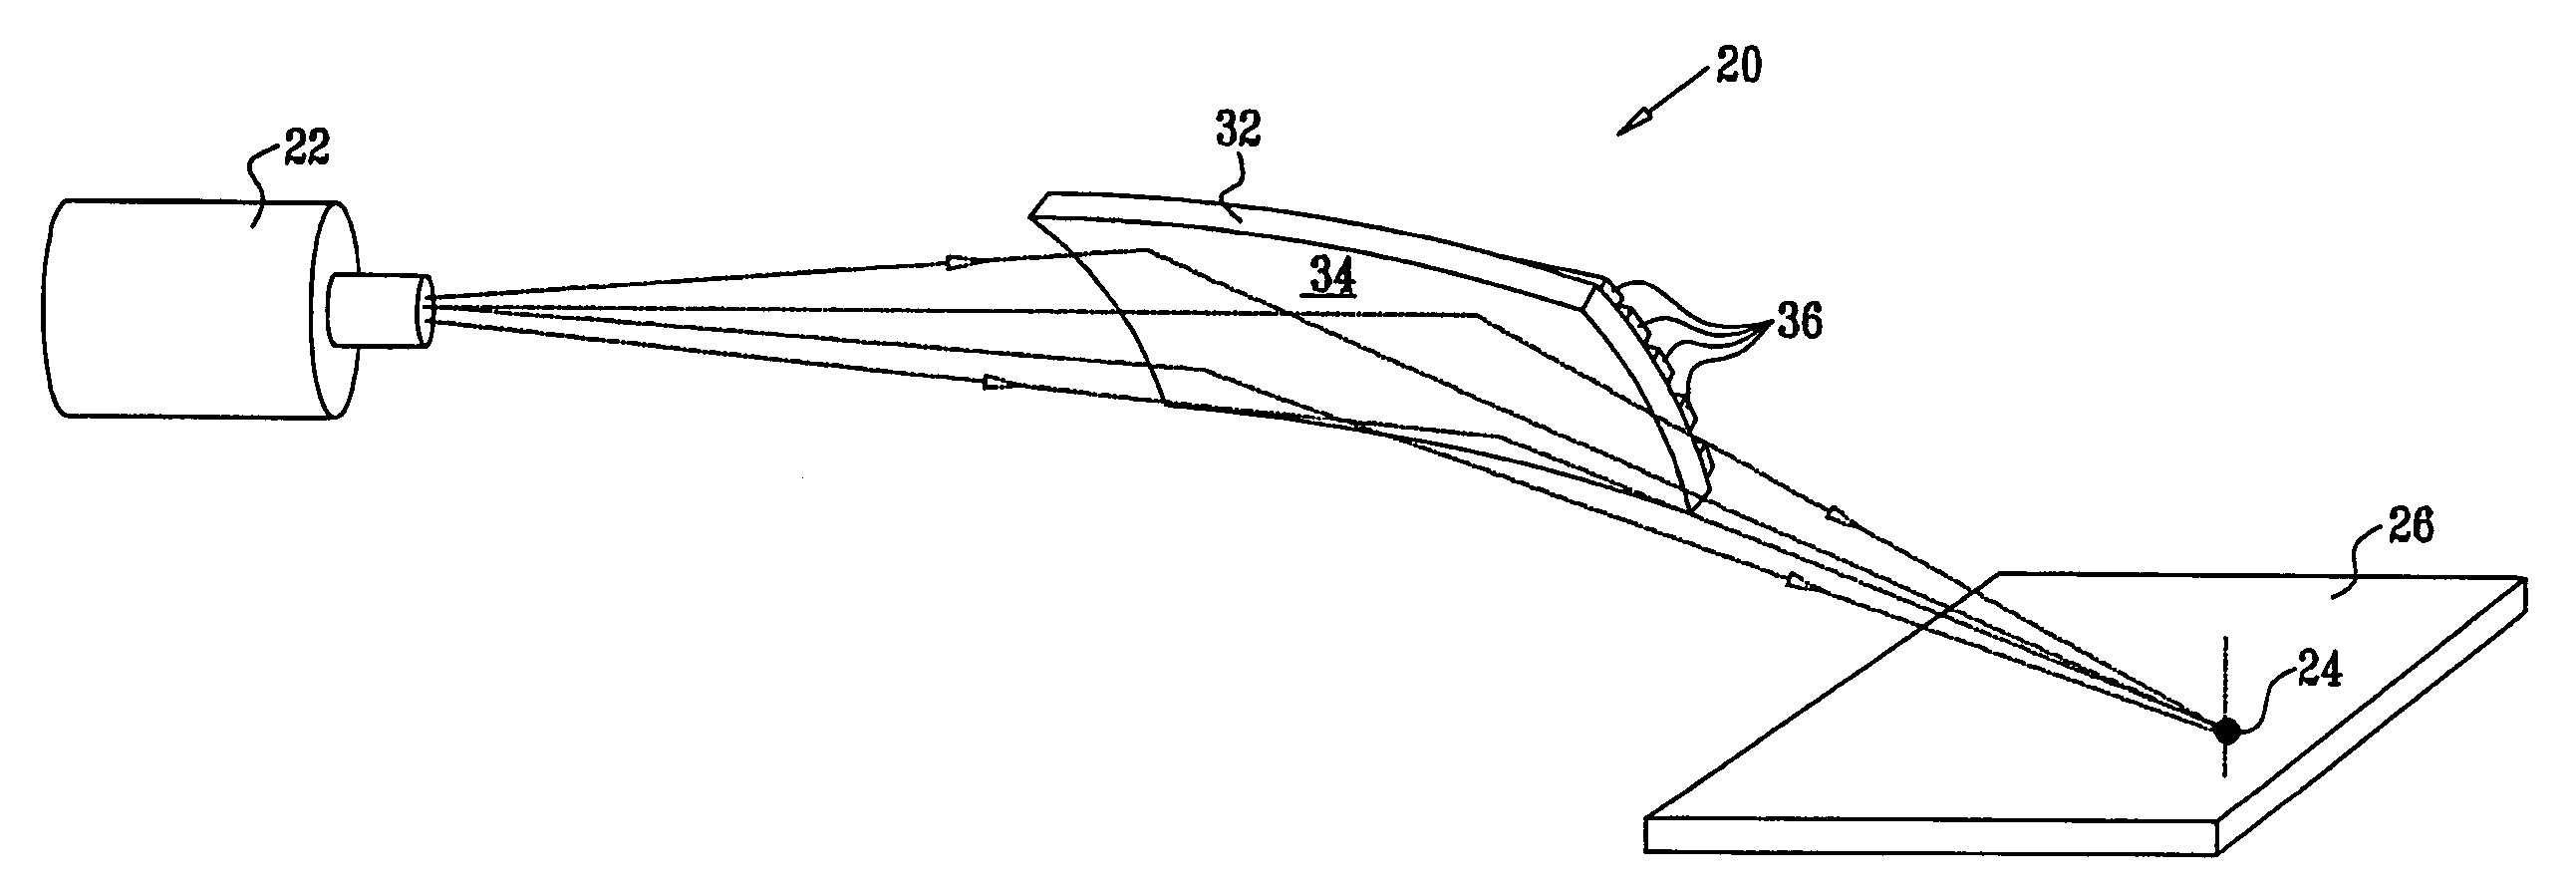 Curved X-ray reflector